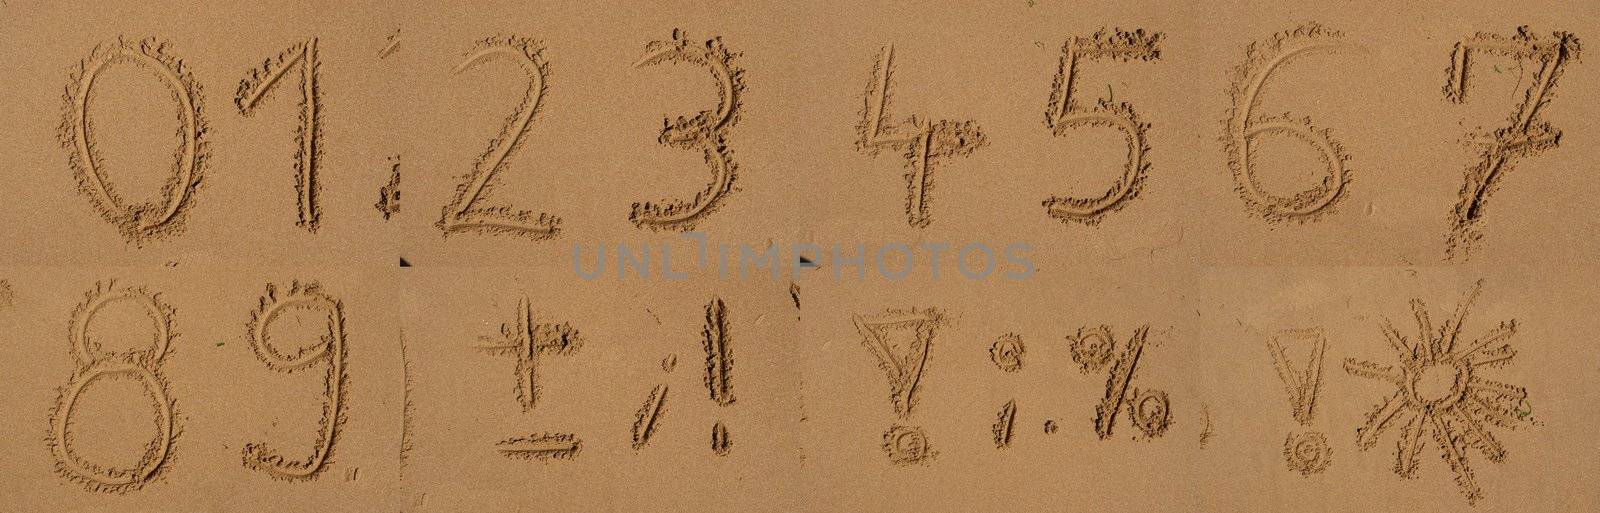 The Alphabet Written In Sand On A Beach. by yucas